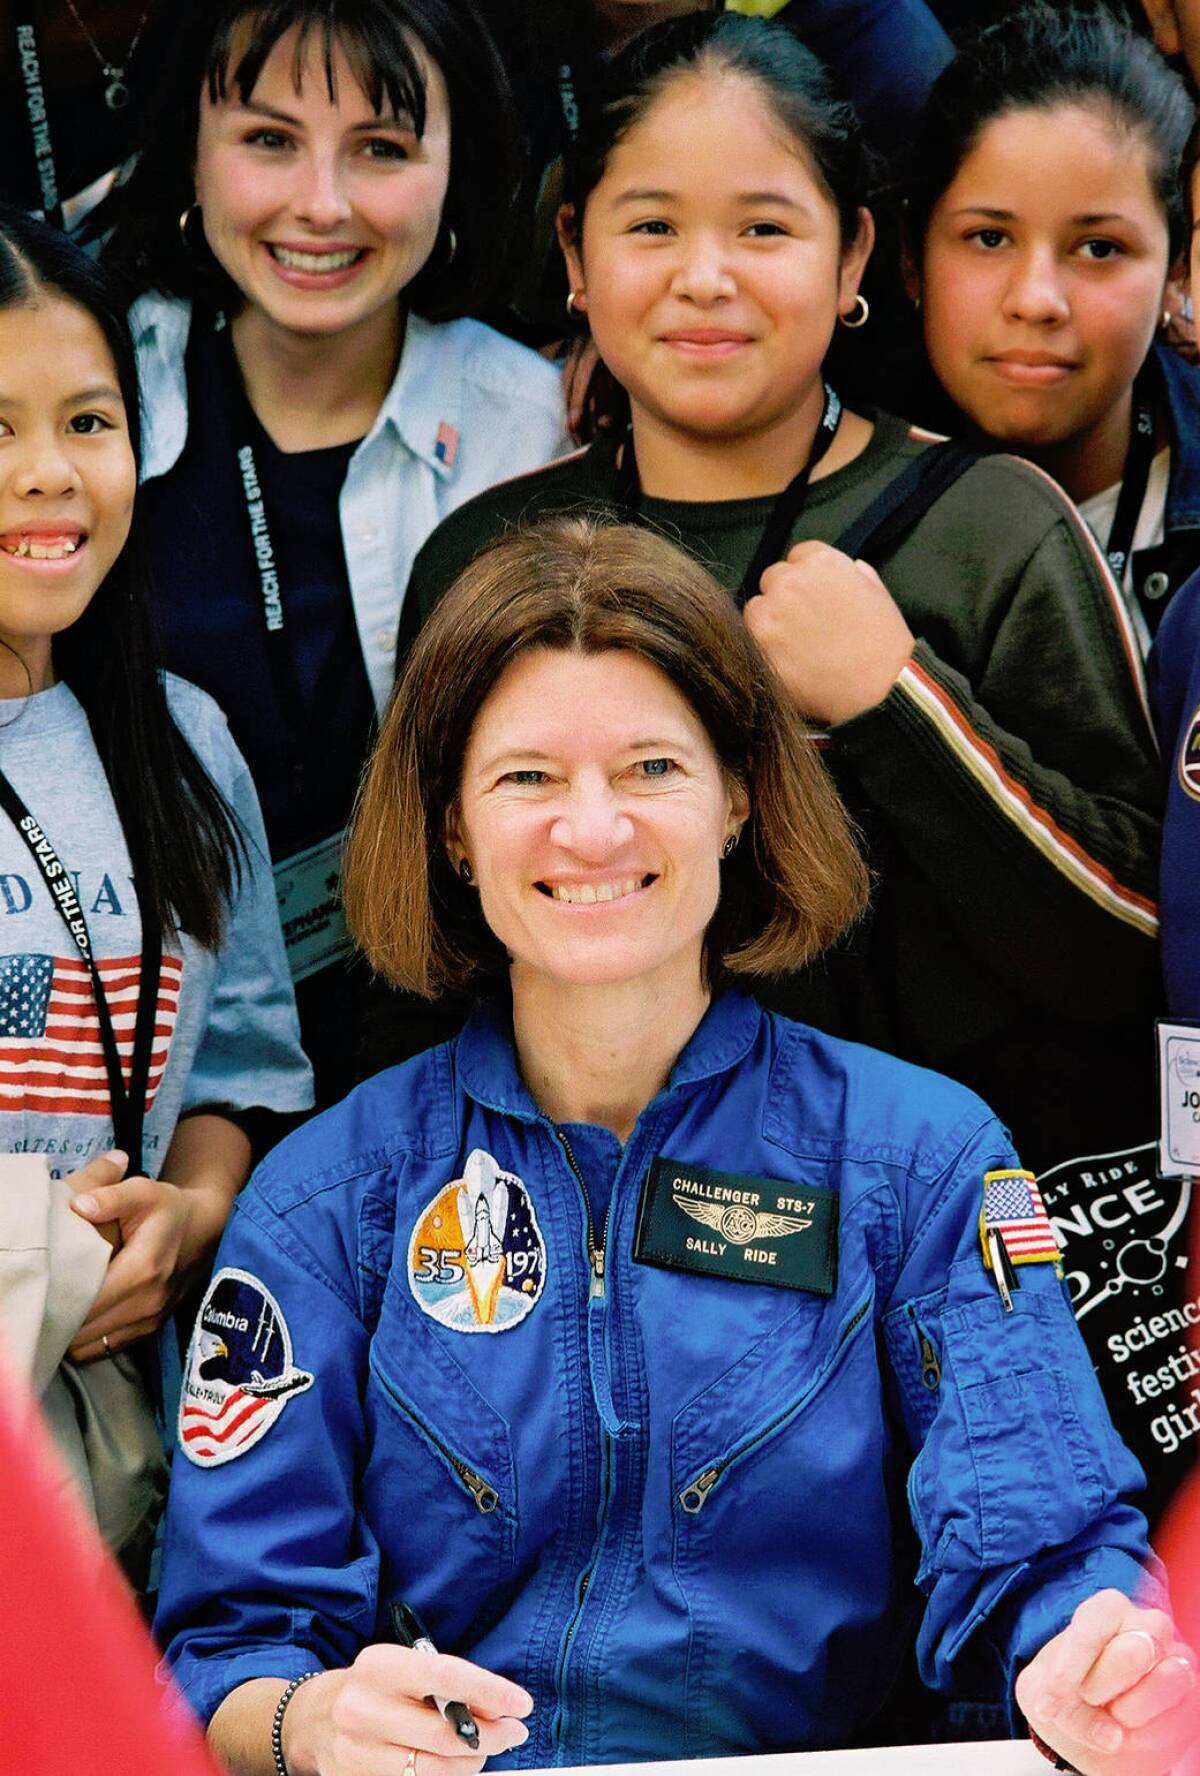 Sally Ride (front) was the first American woman in space and is the namesake of Sally Ride Science. She died in 2012.